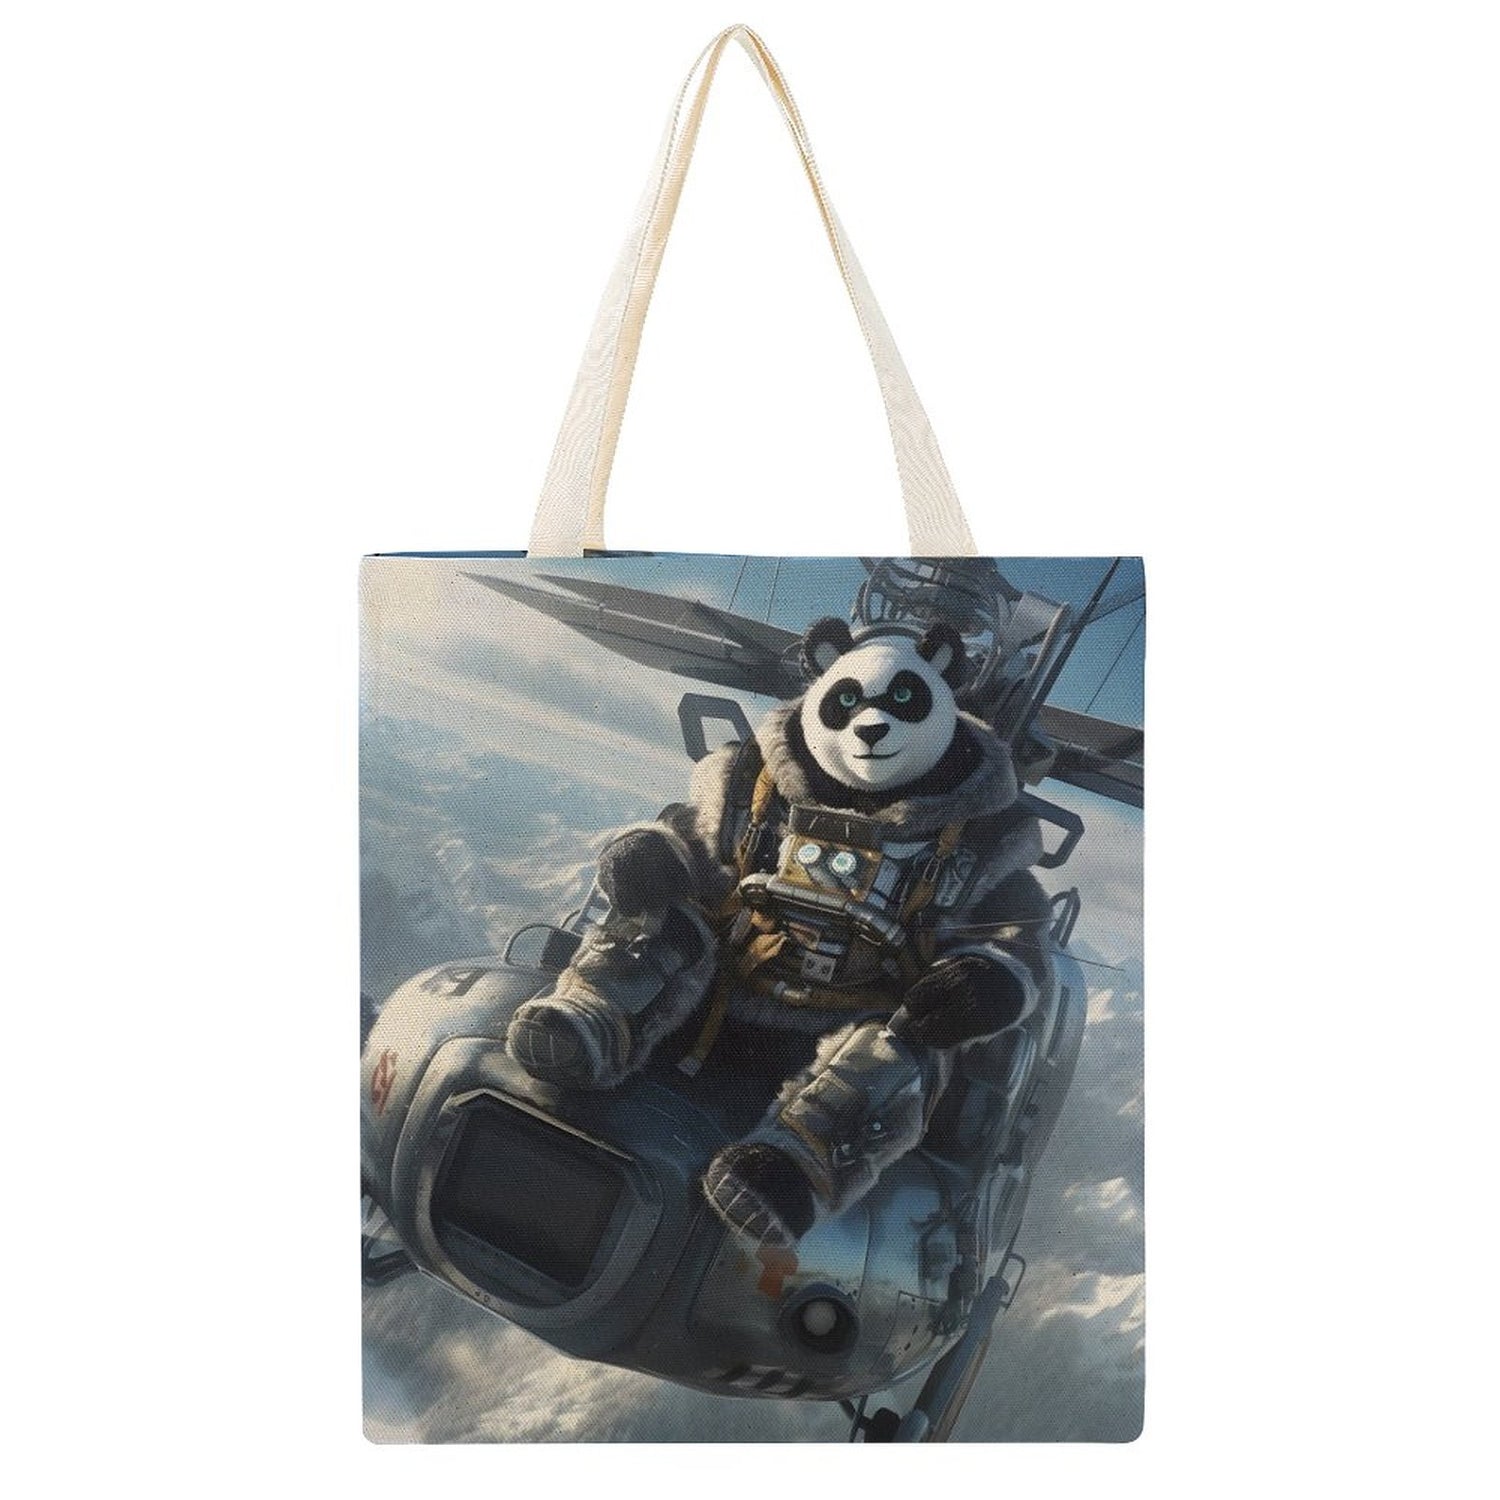 Canvas Tote Bag Double SolarLab_a_Panda_pilot_drive_a_helicopter_in_the_sky_on_snow_mo_95f91f10-ef8b-415e-a56a-7bed42471286 Style-10 38×41cm normal-online-PERSONAL DESIGN